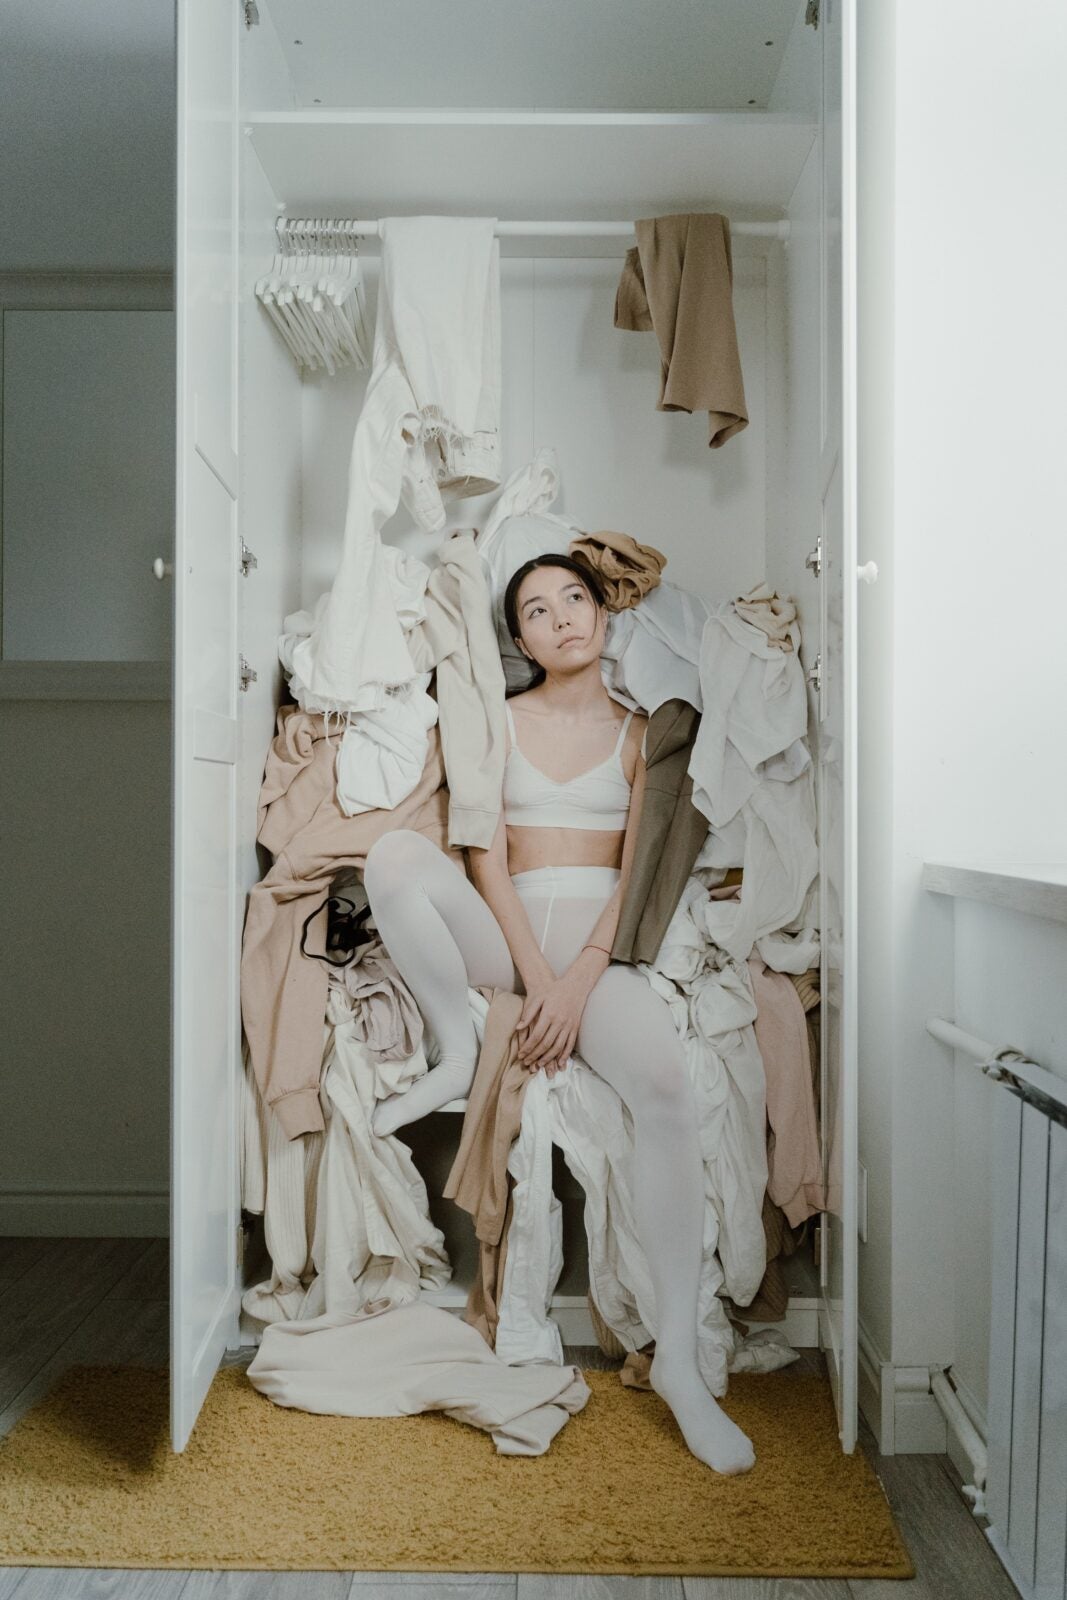 A woman sitting in her closet with clothes messy on her.